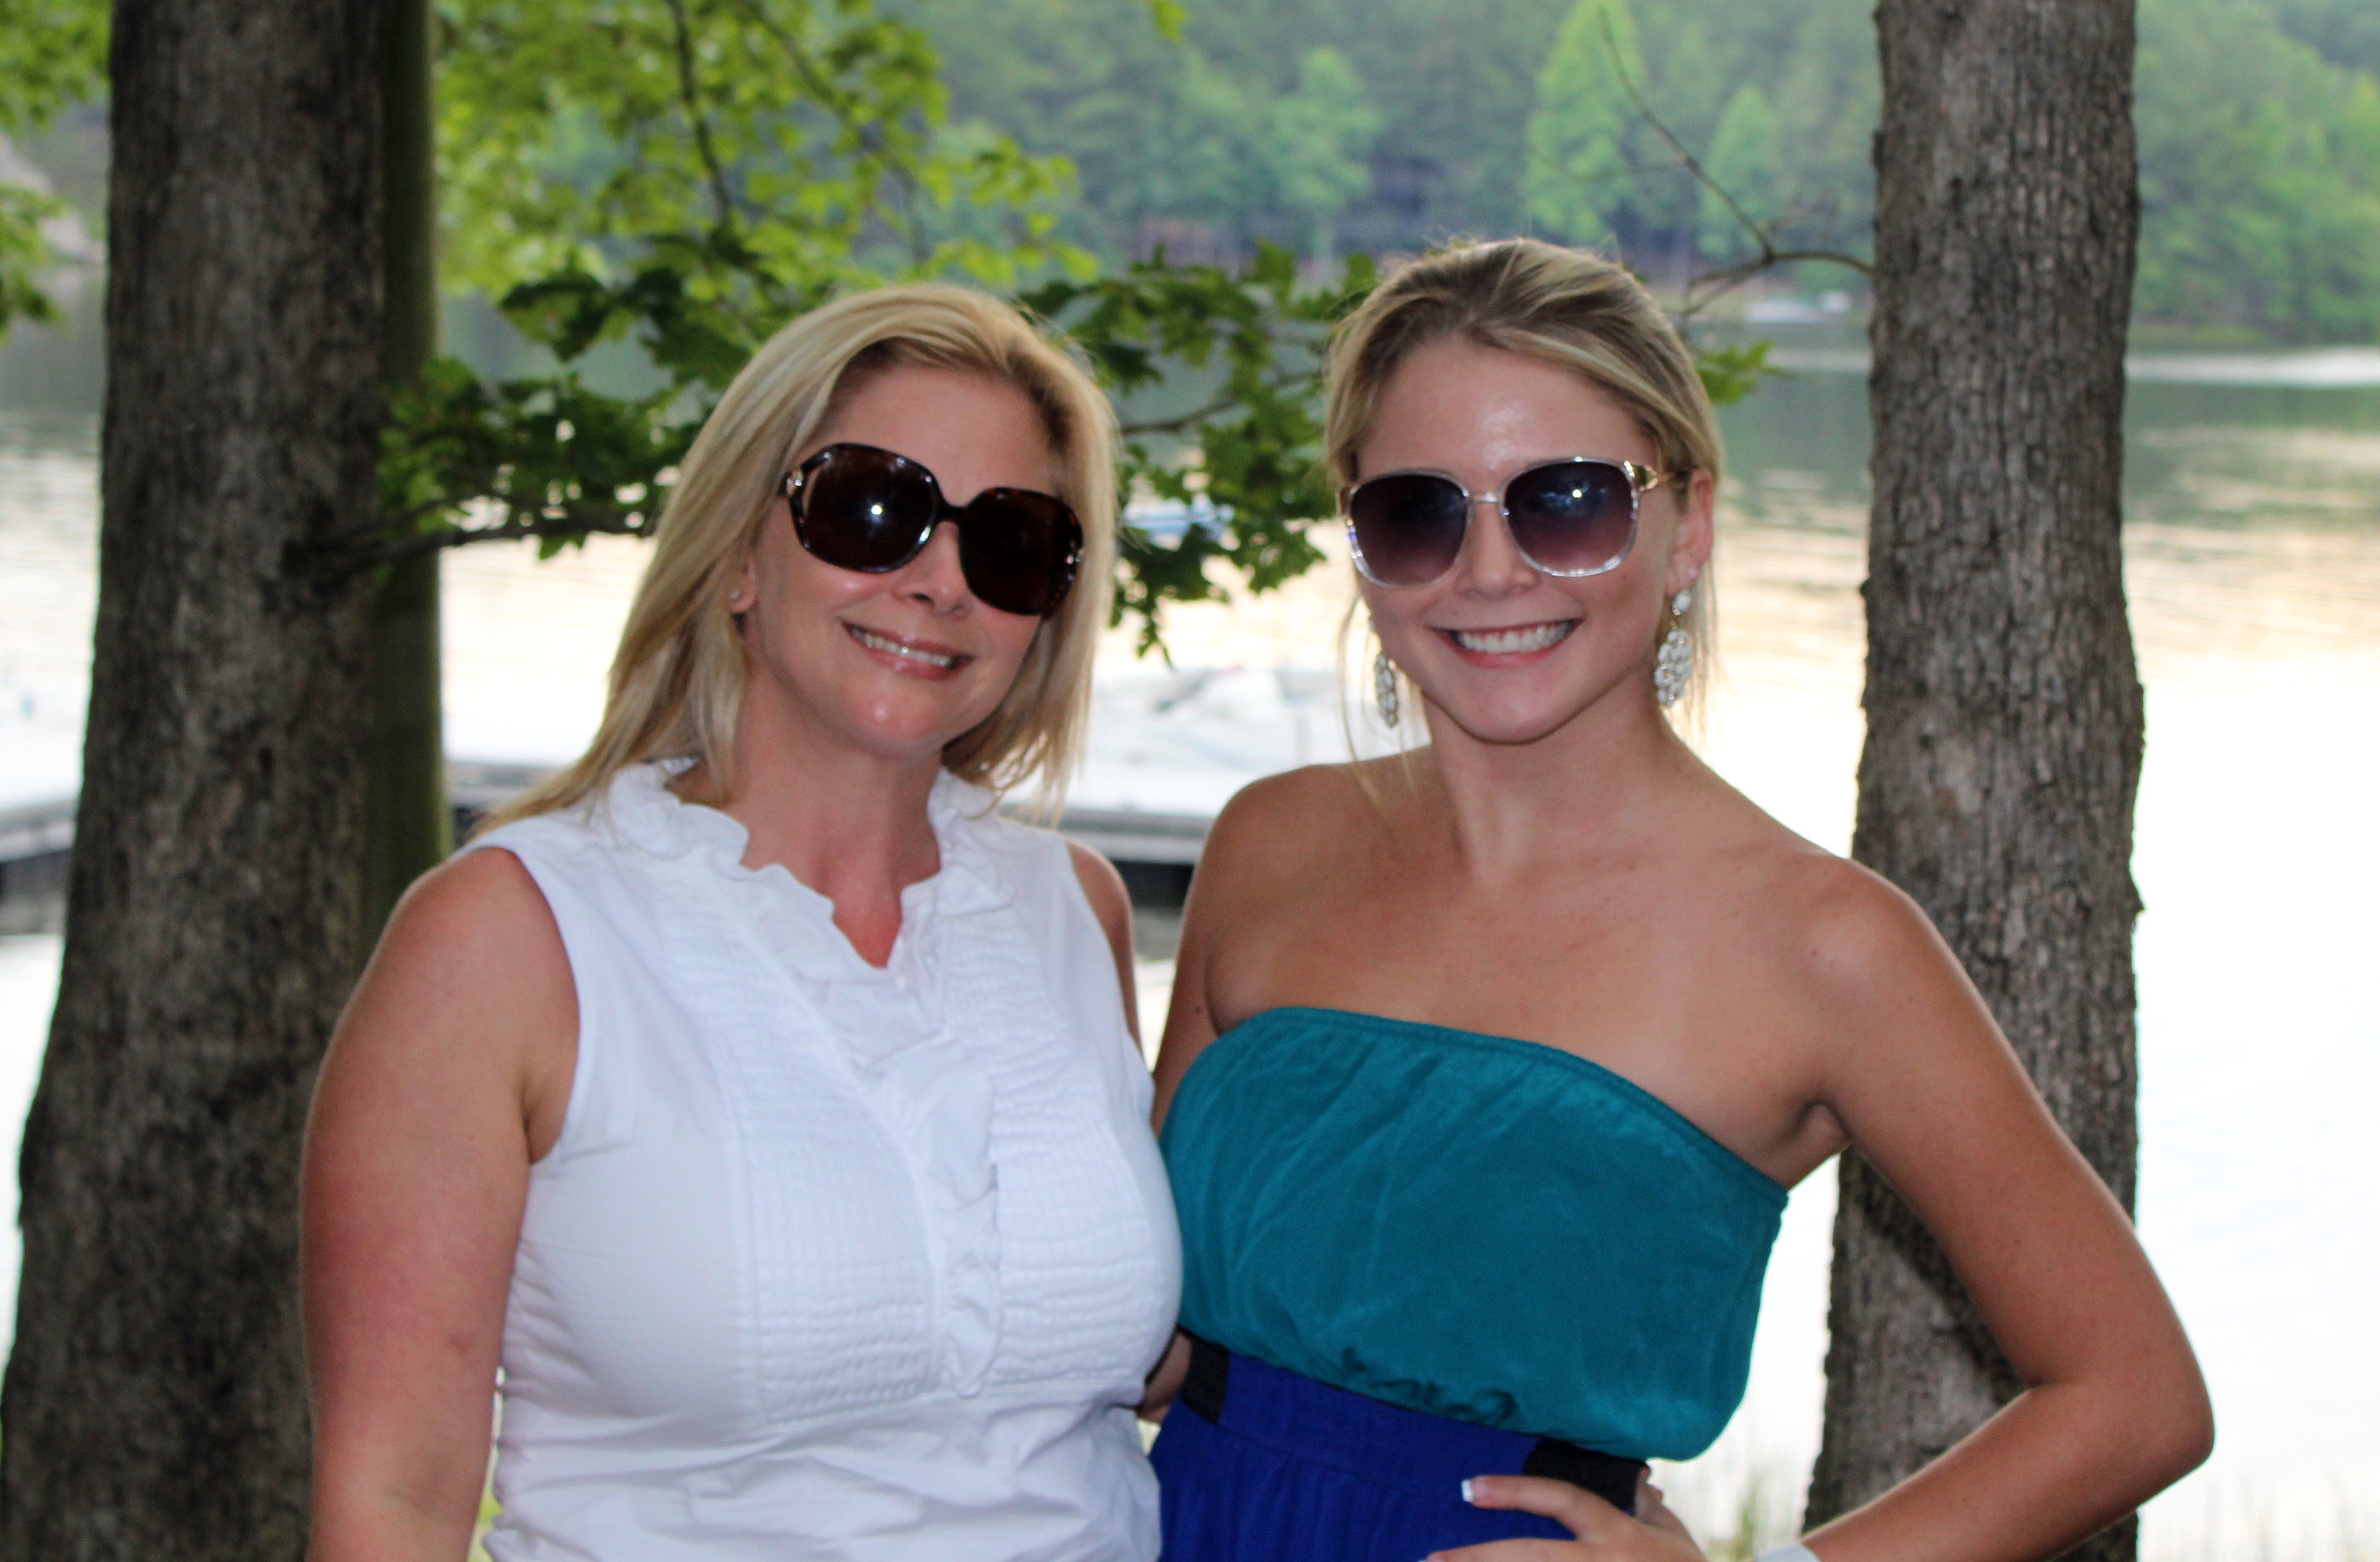 Anna and her daughter, Taylor, vacationing last summer in Mount Eagle, TN.